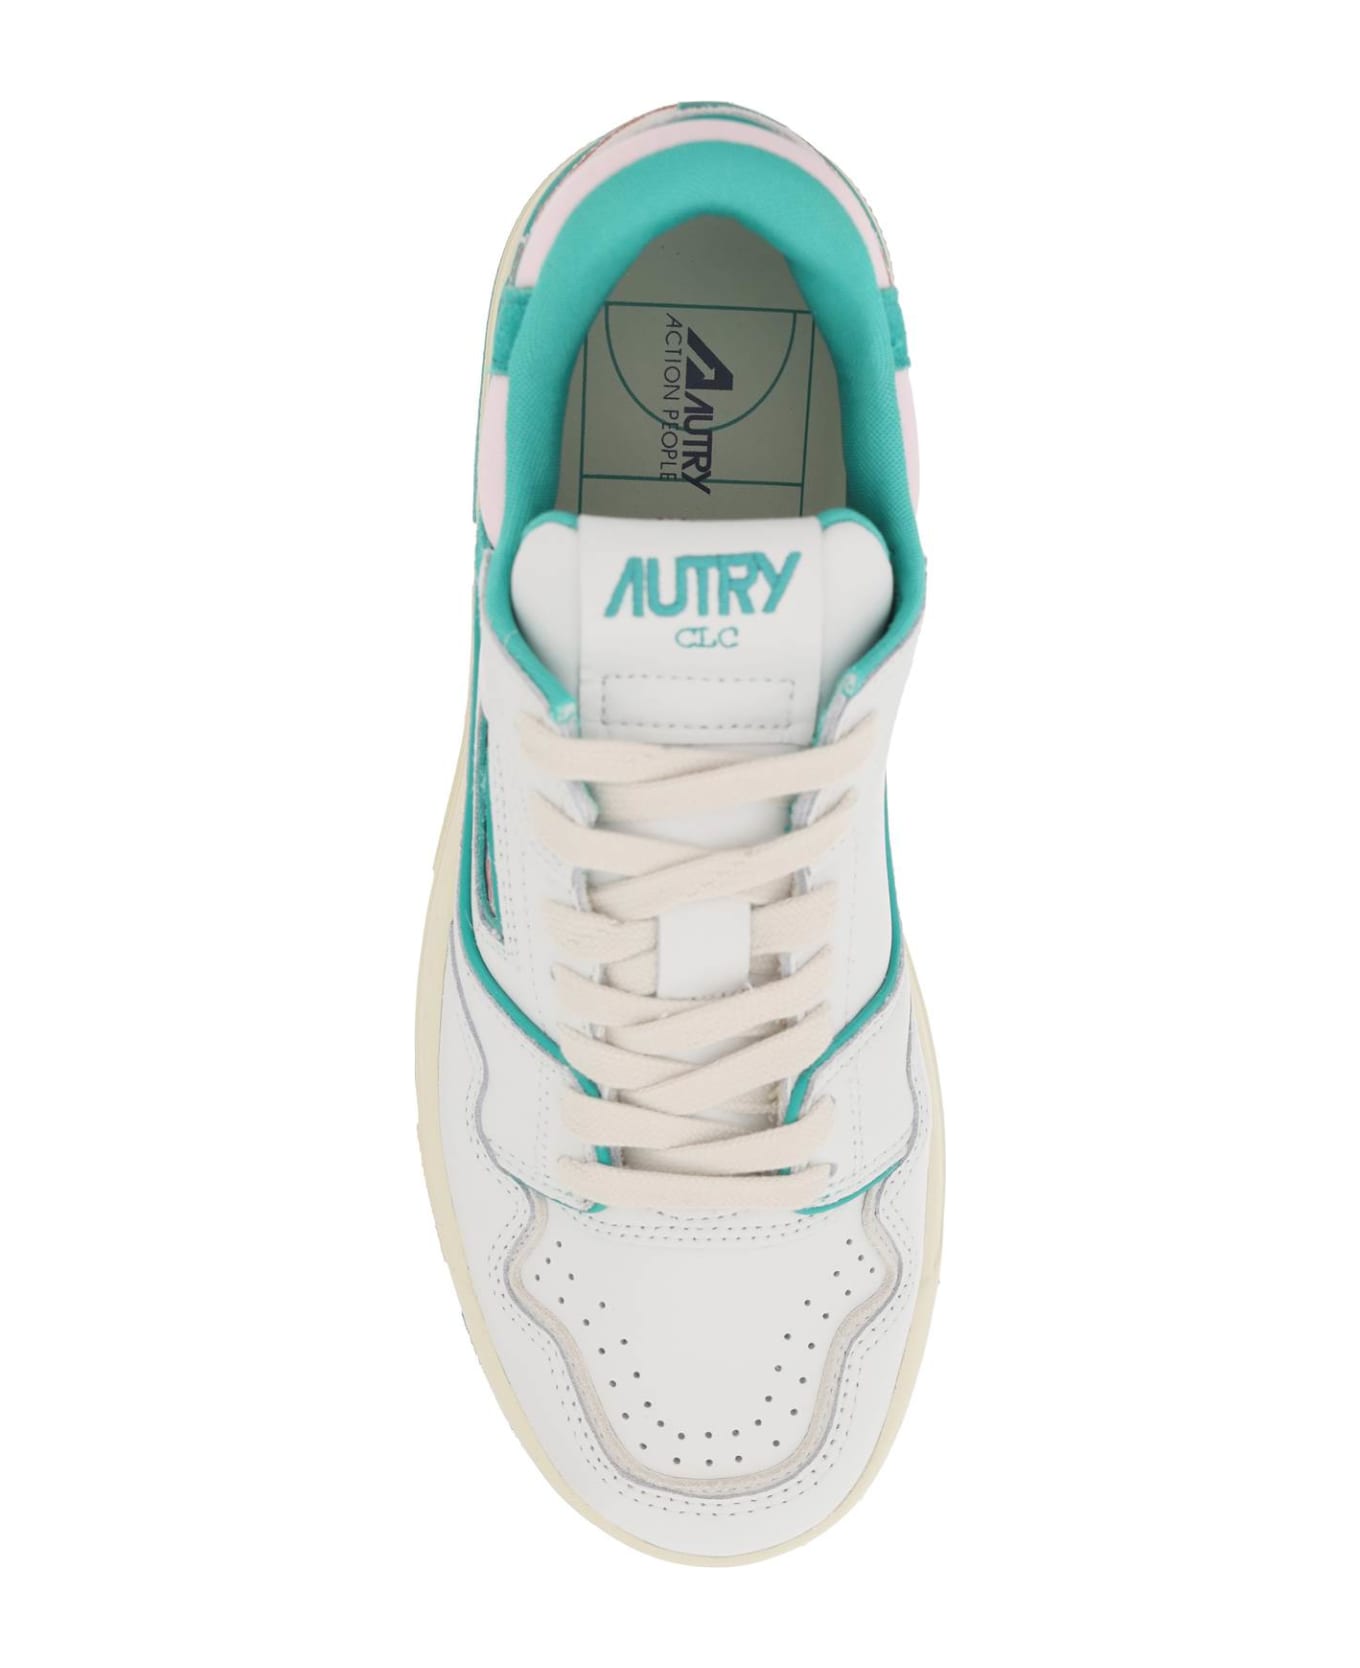 Autry Clc Sneakers In White And Green Leather - White スニーカー